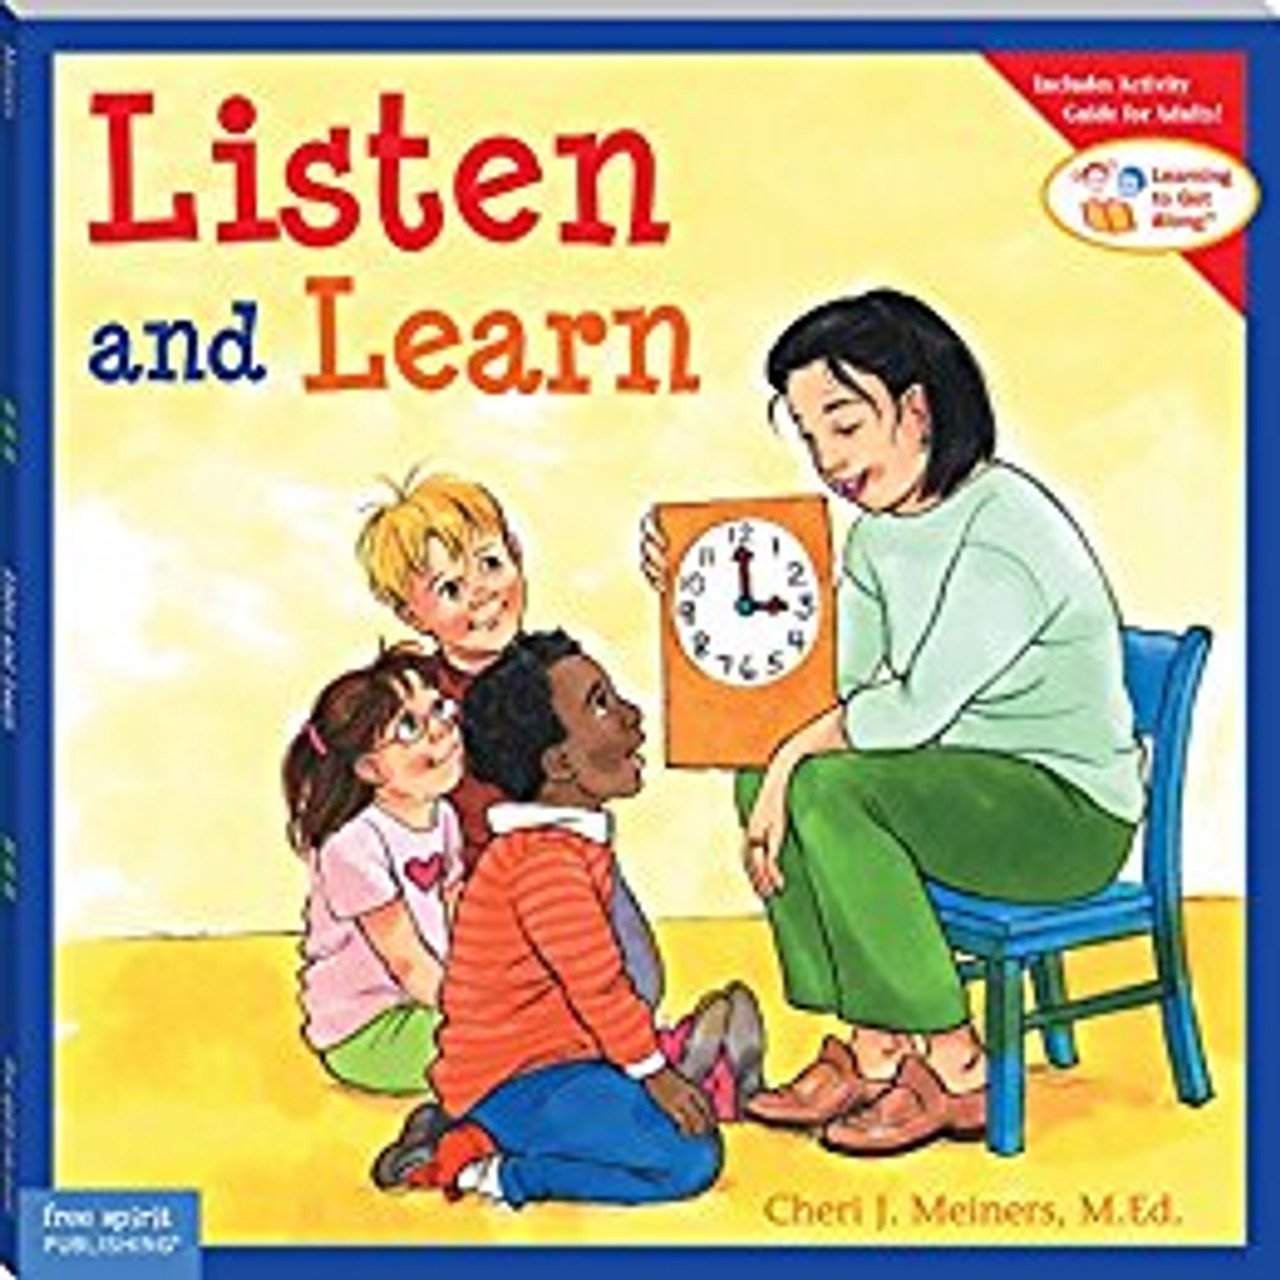 Knowing how to listen is essential to learning, growing, and getting along with others.  Simple words and inviting illustrations help children develop listening skills, understand why its important to listen, and recognize the positive results of listening.  Includes a note to teachers and parents, additional information for adults, and activities.